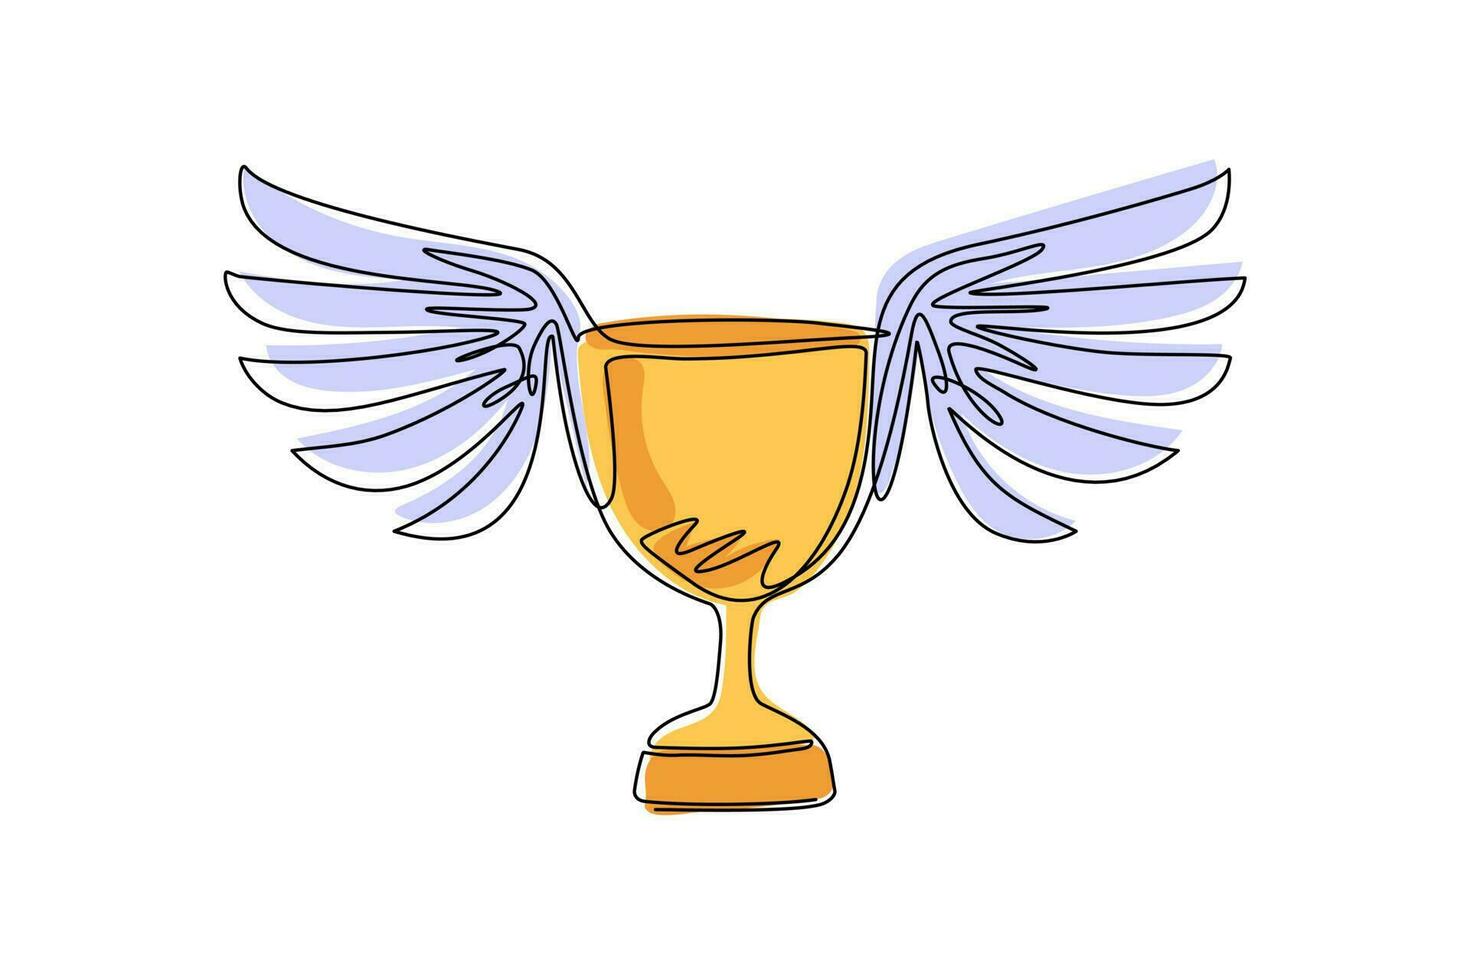 Continuous one line drawing winning trophy with wings design, winner first position competition success sport best leadership compete and challenge theme. Single line draw design vector illustration